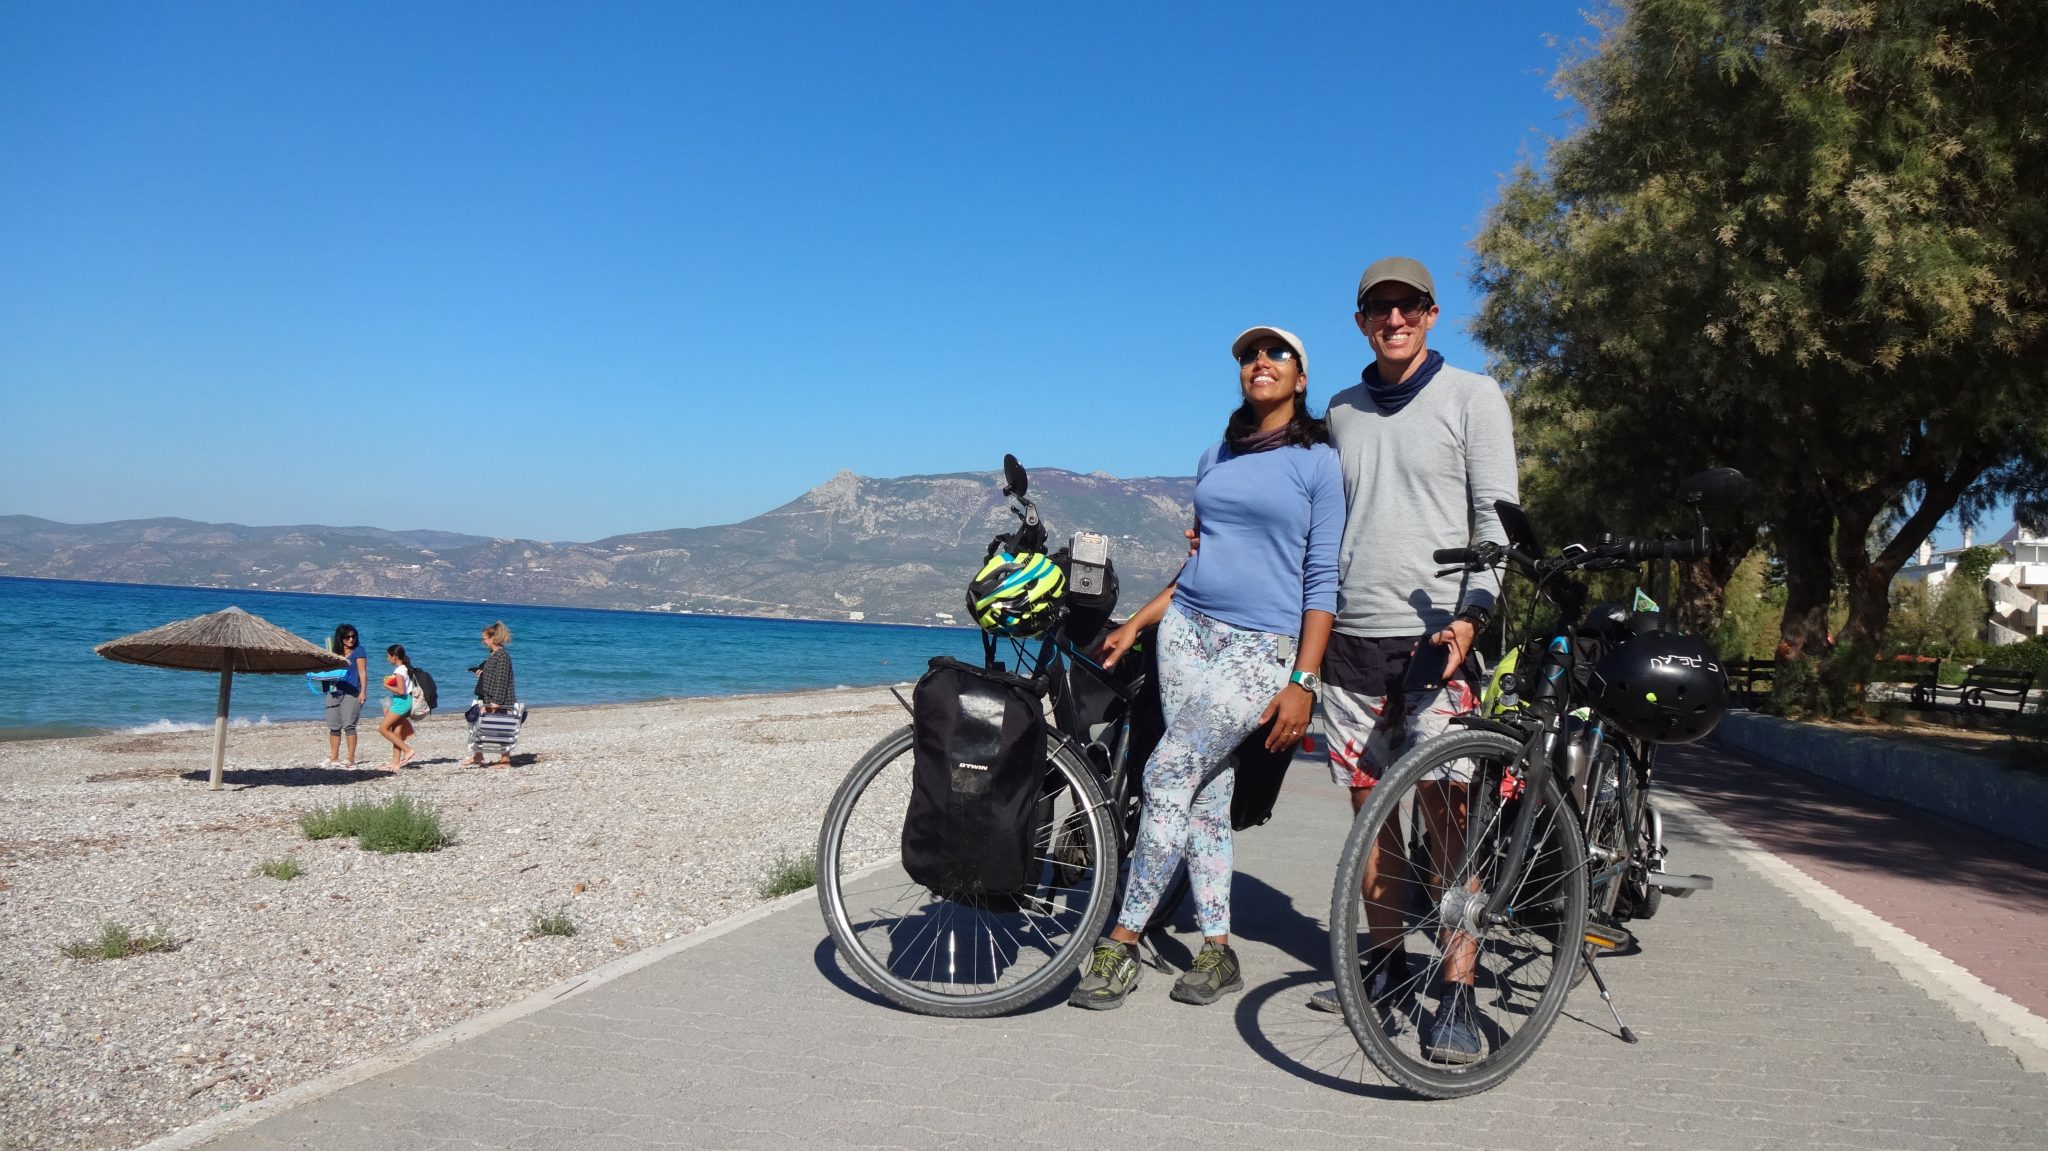 Greece by bike: stories, problems and experiences | Stories | Eurasia ...